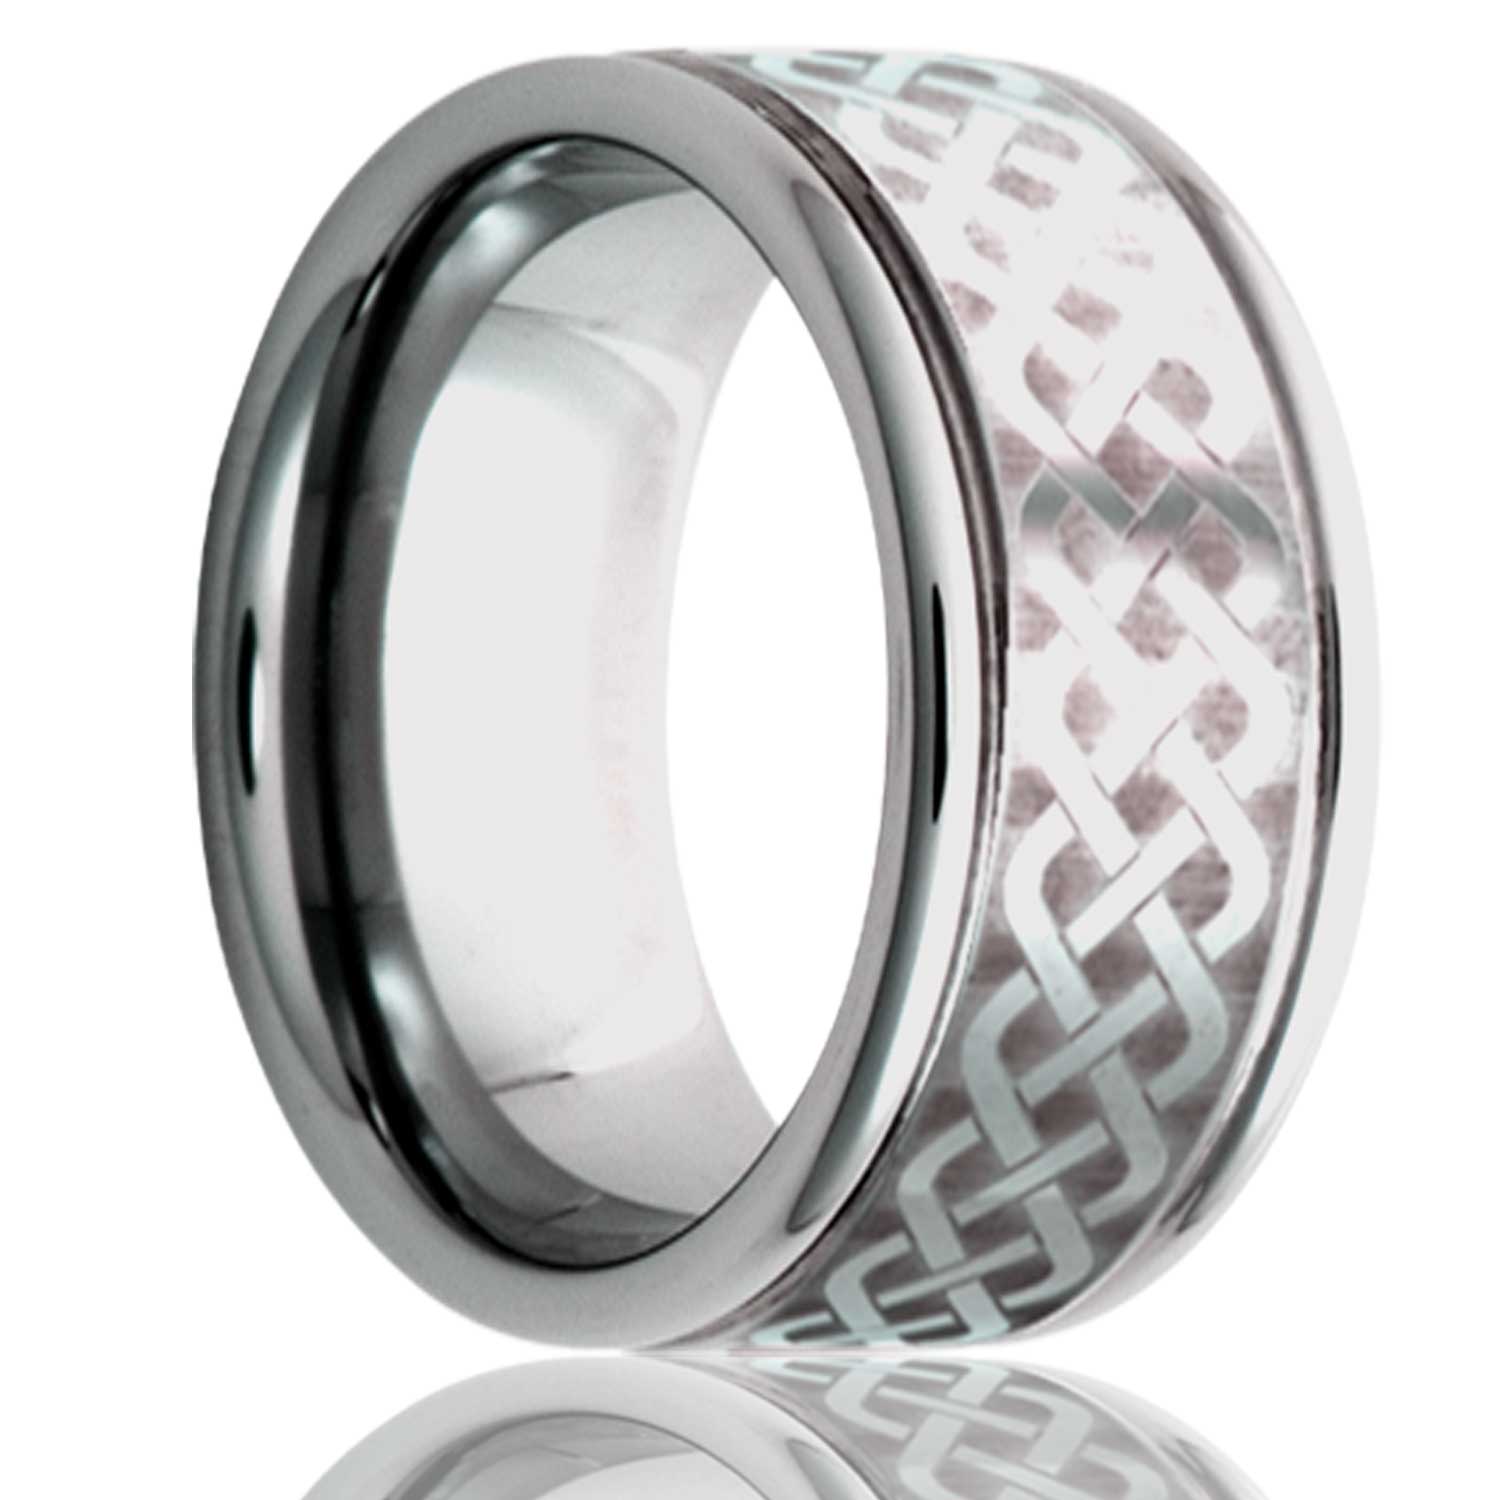 A celtic sailor's knot grooved cobalt wedding band displayed on a neutral white background.